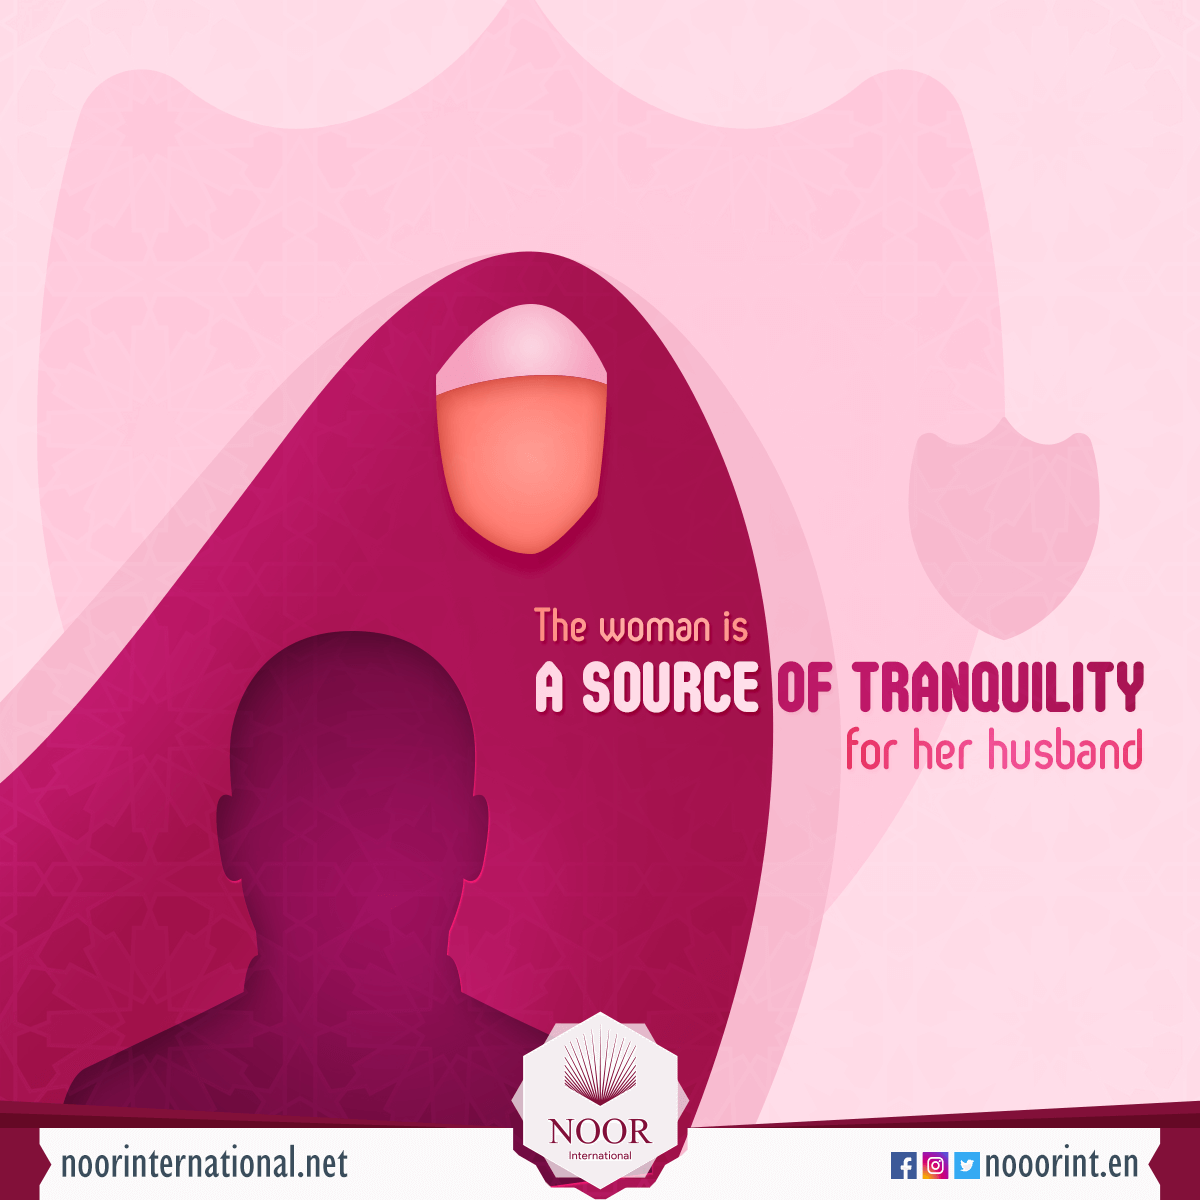 The woman is a source of tranquility for her husband